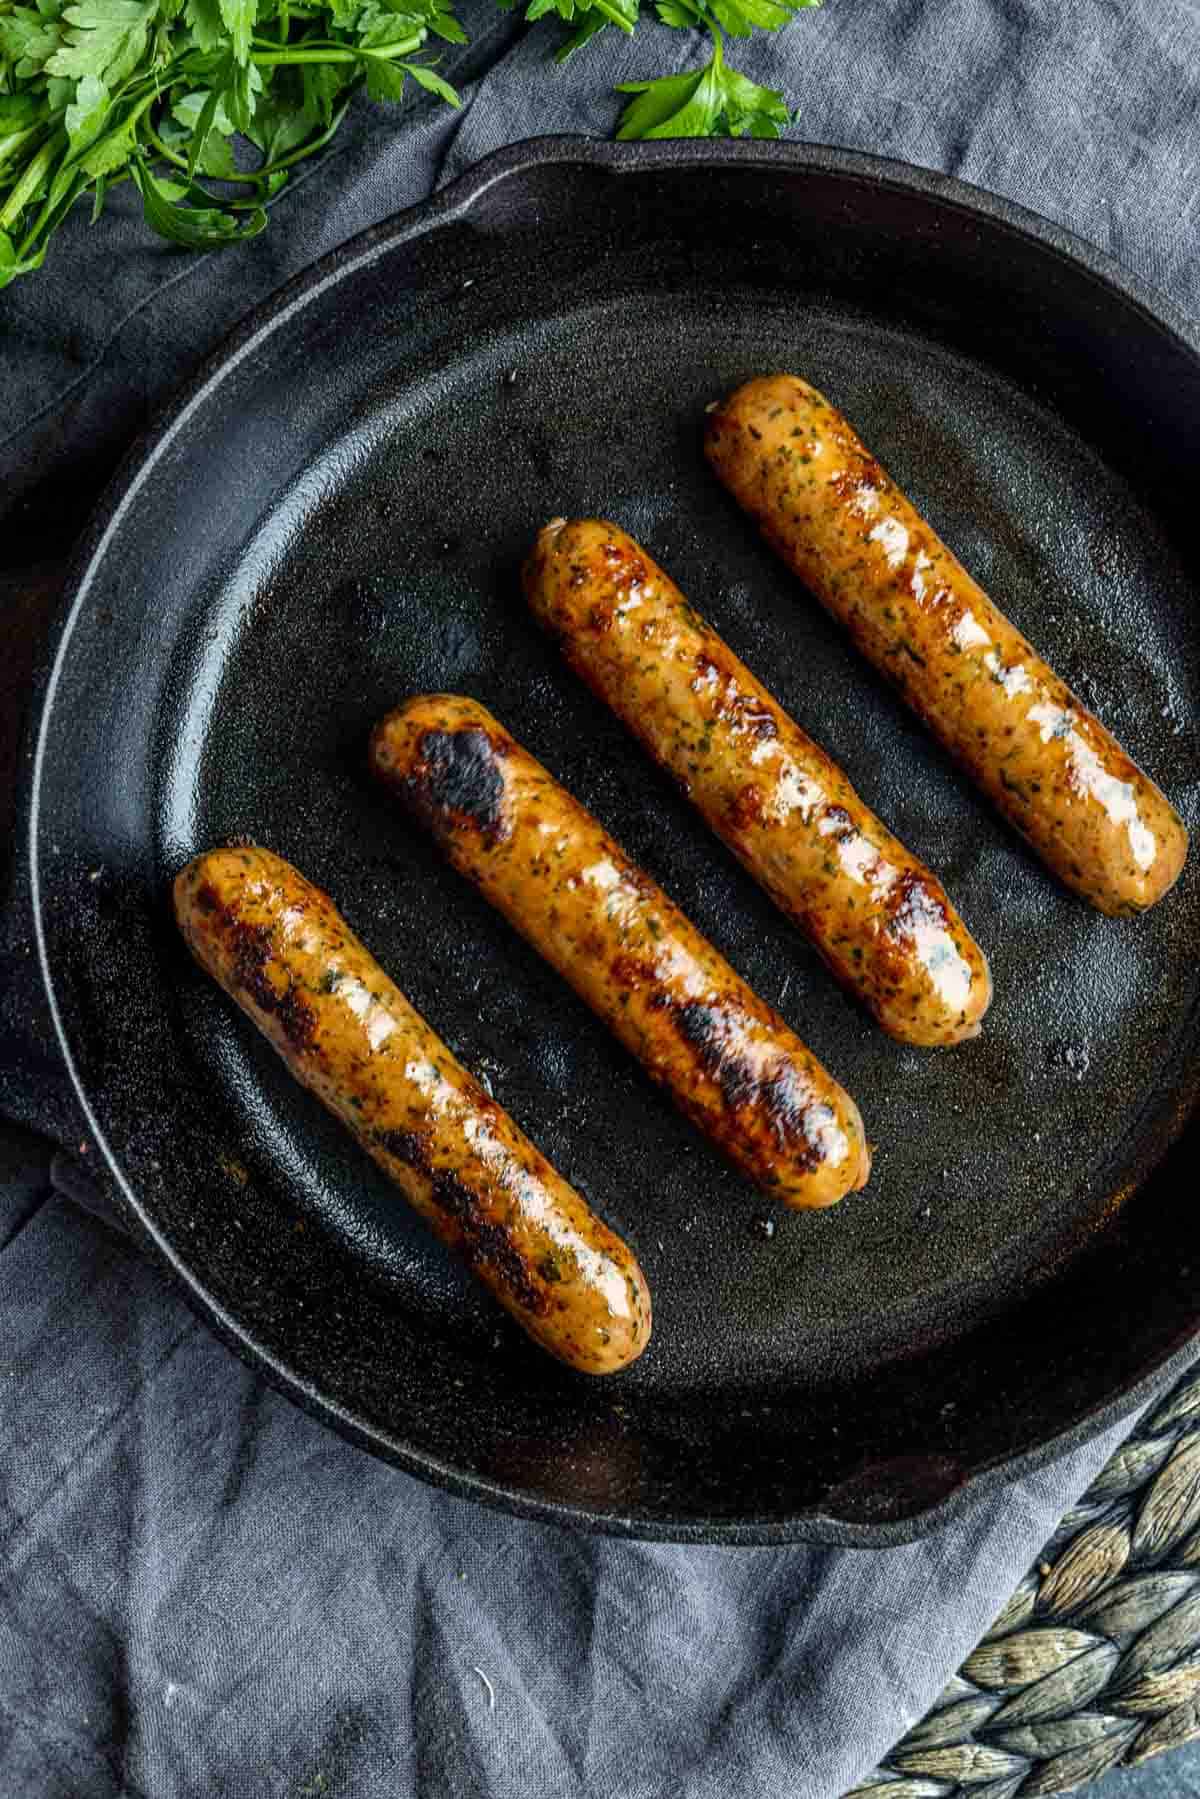 How to Cook Chicken Sausage in a skillet